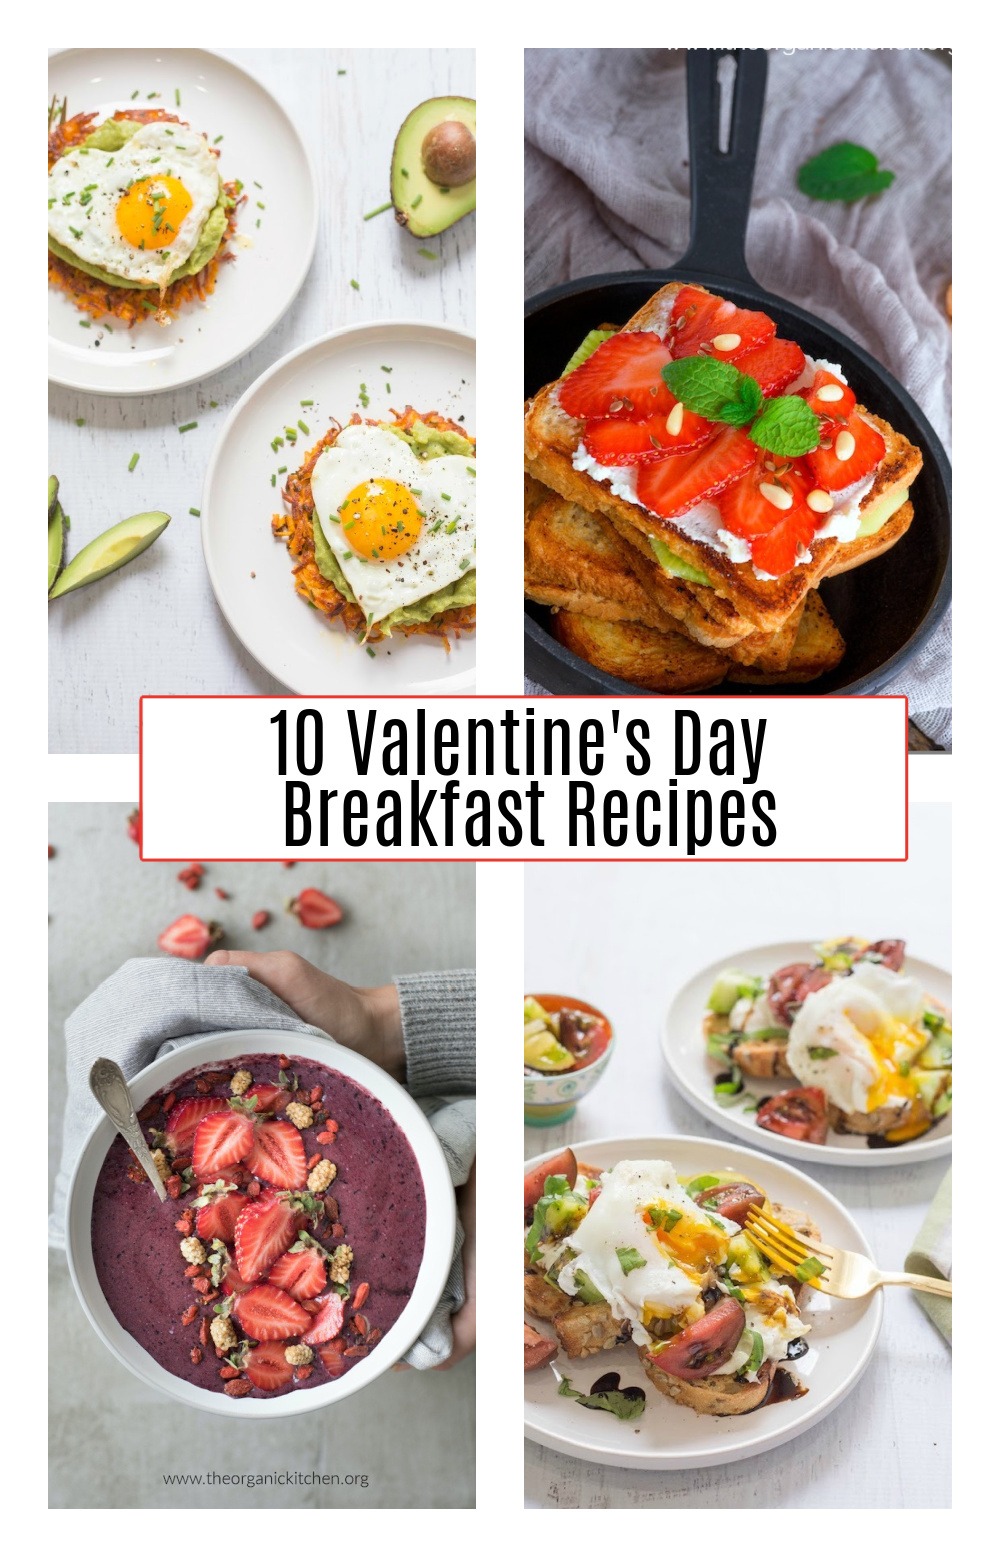 A collage of Valentine breakfast options: potato fritters, French toast, smoothie bowls, burrata toast